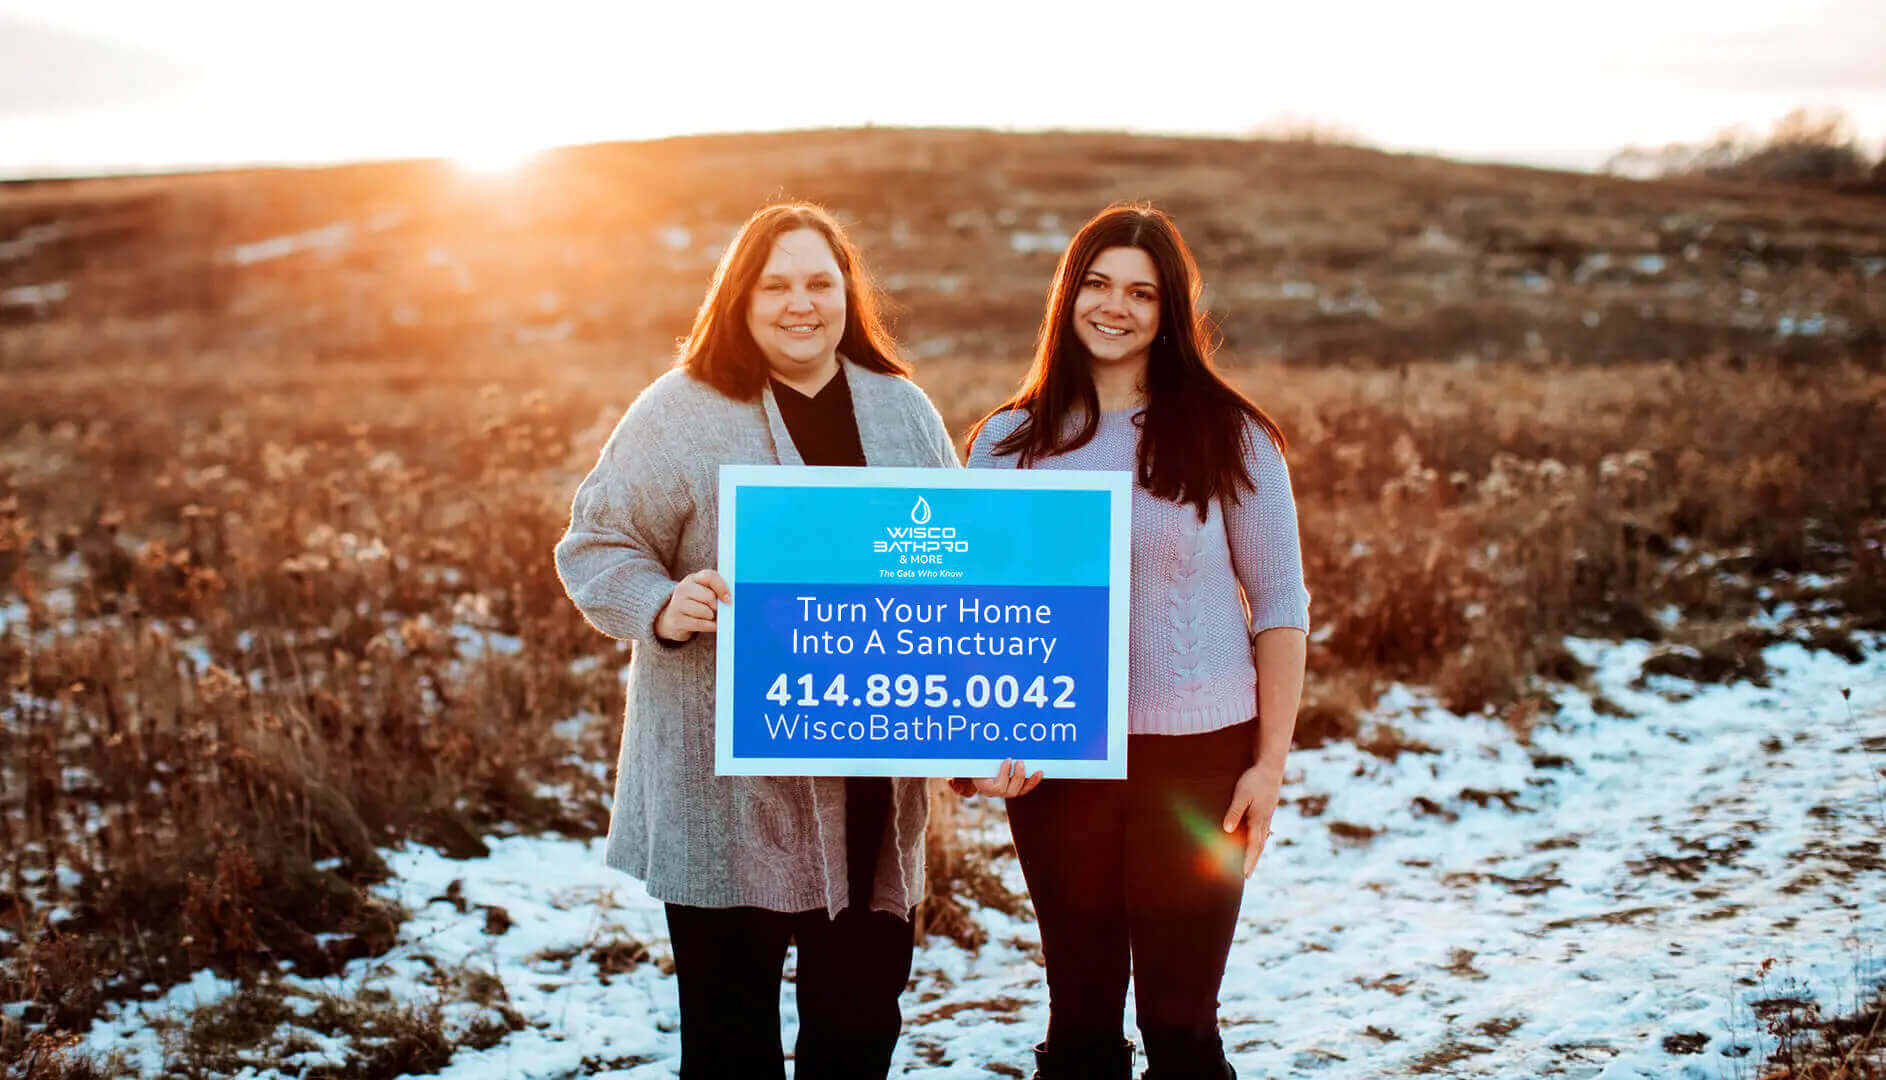 <br />
The image shows two women standing in a field at sunset, holding a blue sign with the logo and contact information for "Wisco BathPro & More". The sign reads "Turn Your Home Into A Sanctuary" along with a phone number and website. The field has sparse vegetation and patches of snow, and the warm glow of the sun highlights the friendly and inviting expressions of the women.